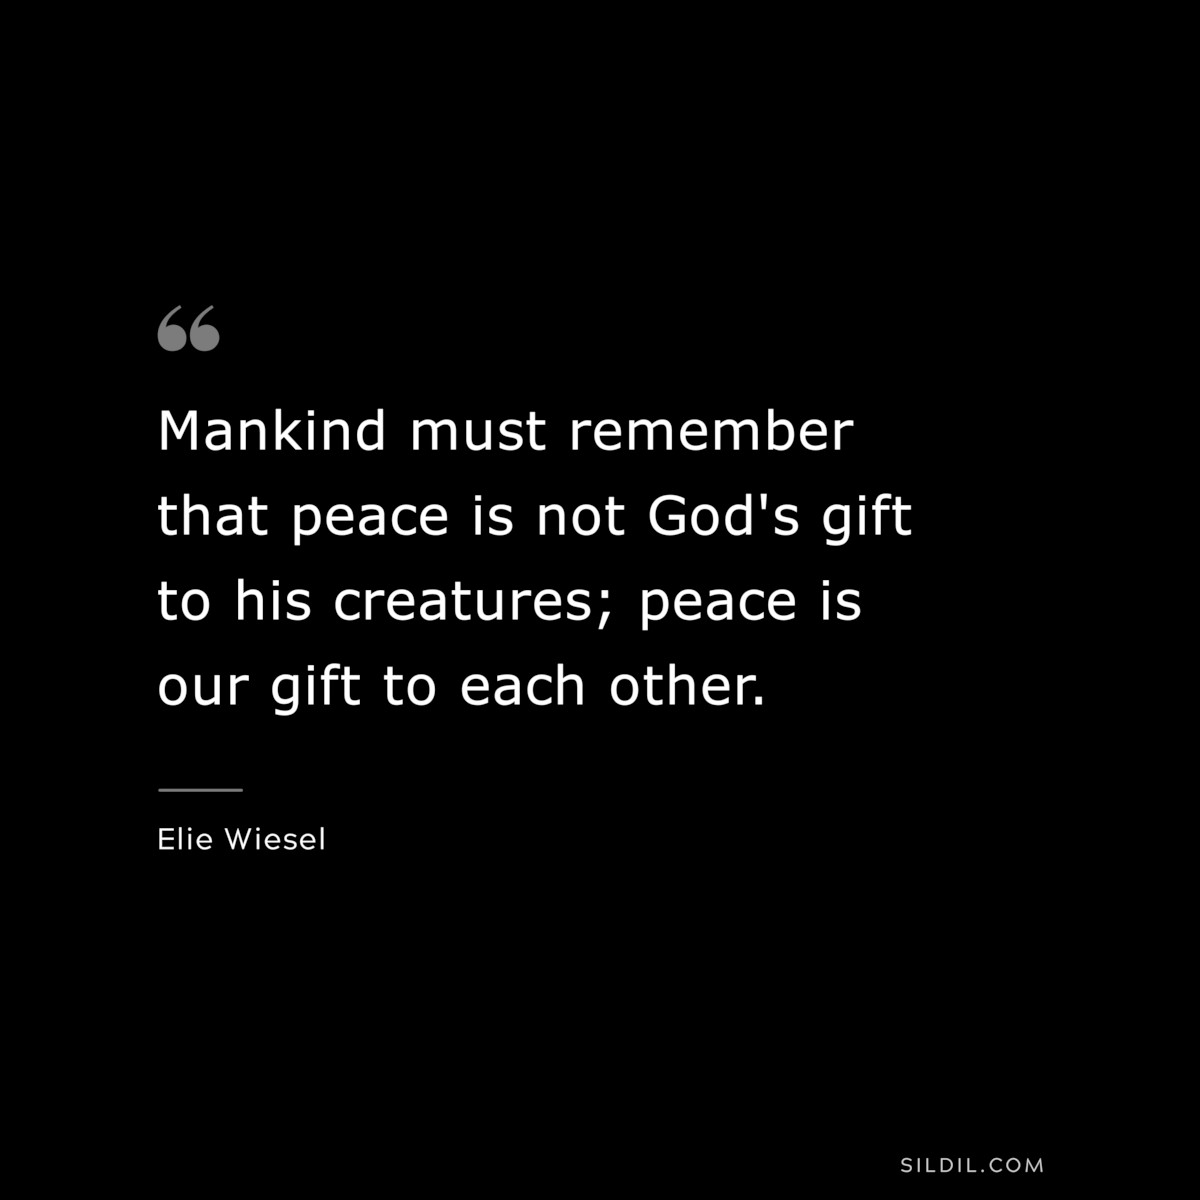 Mankind must remember that peace is not God's gift to his creatures; peace is our gift to each other. ― Elie Wiesel